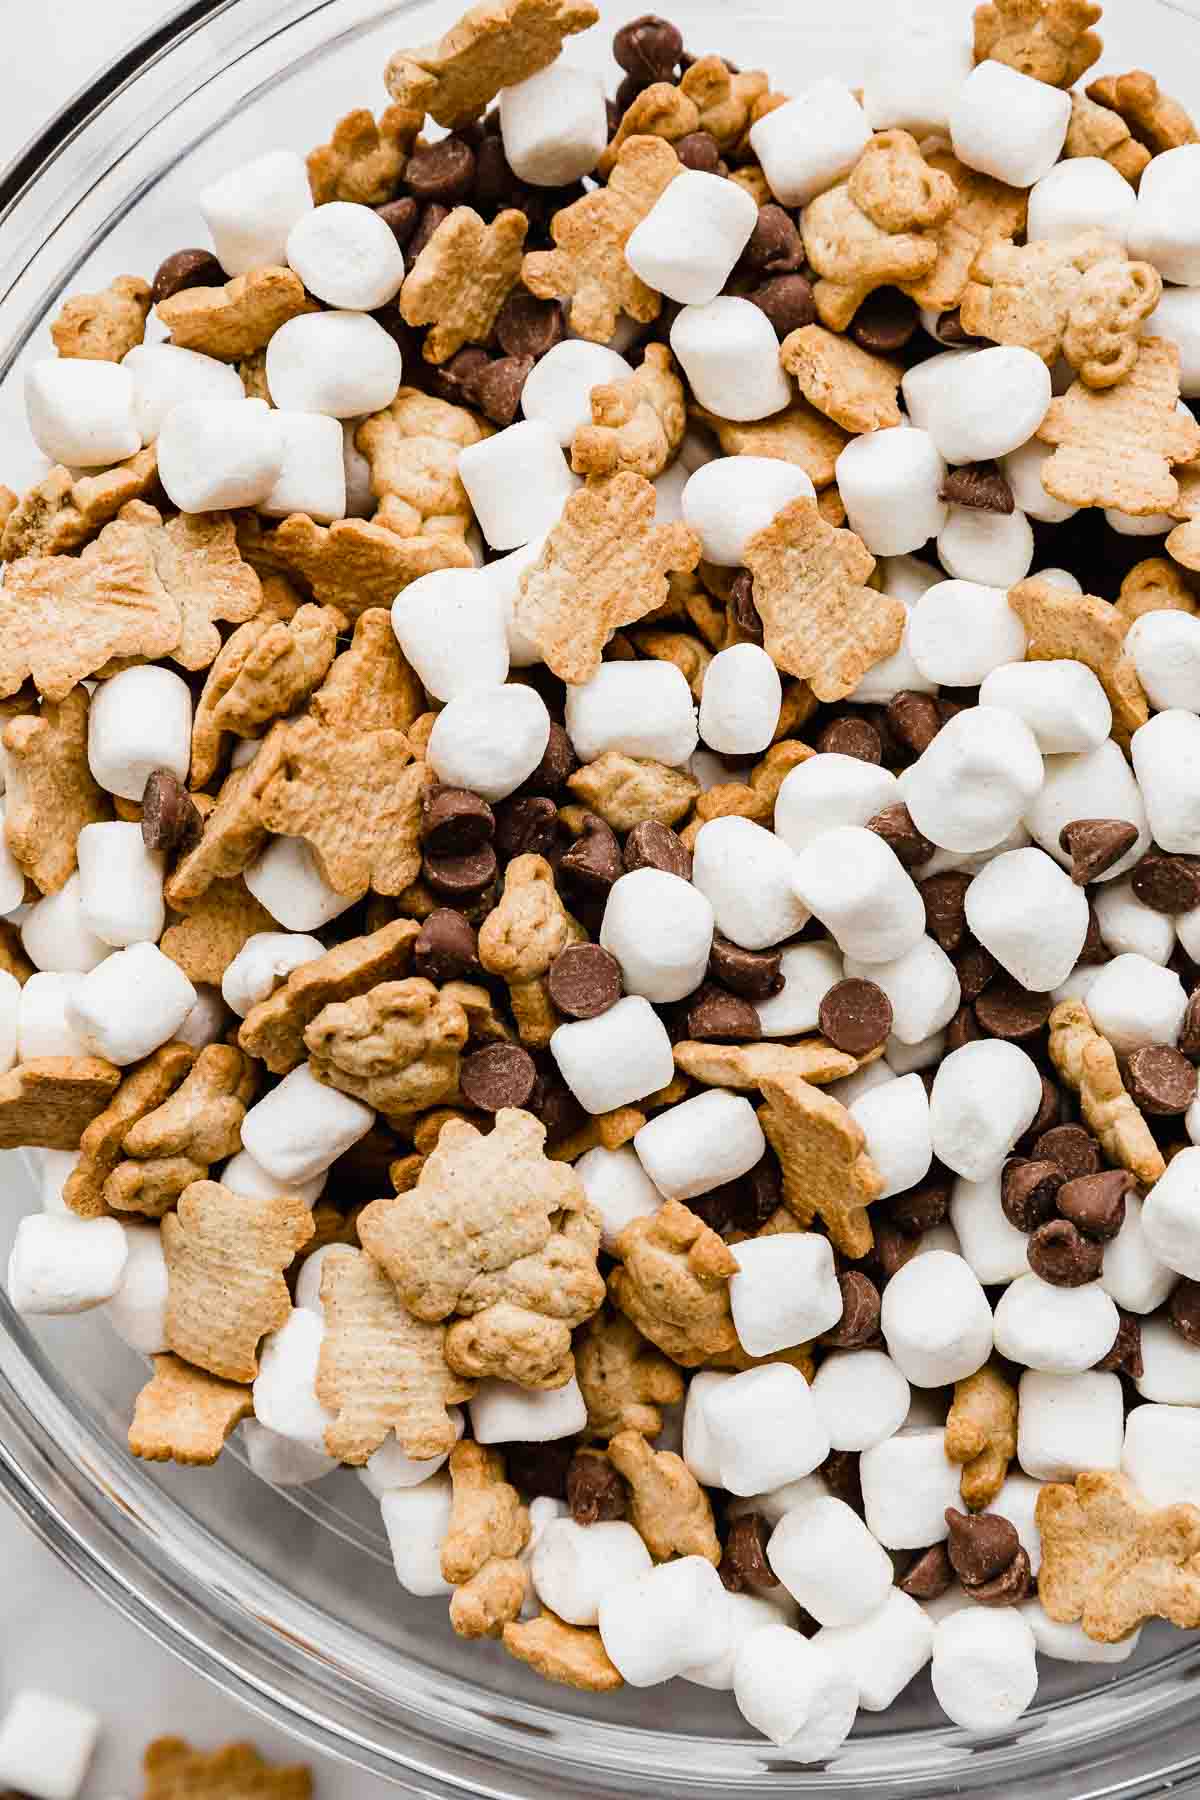 A close up of a S'mores Mix in a glass bowl (milk chocolate chips, marshmallows, and teddy grahams).